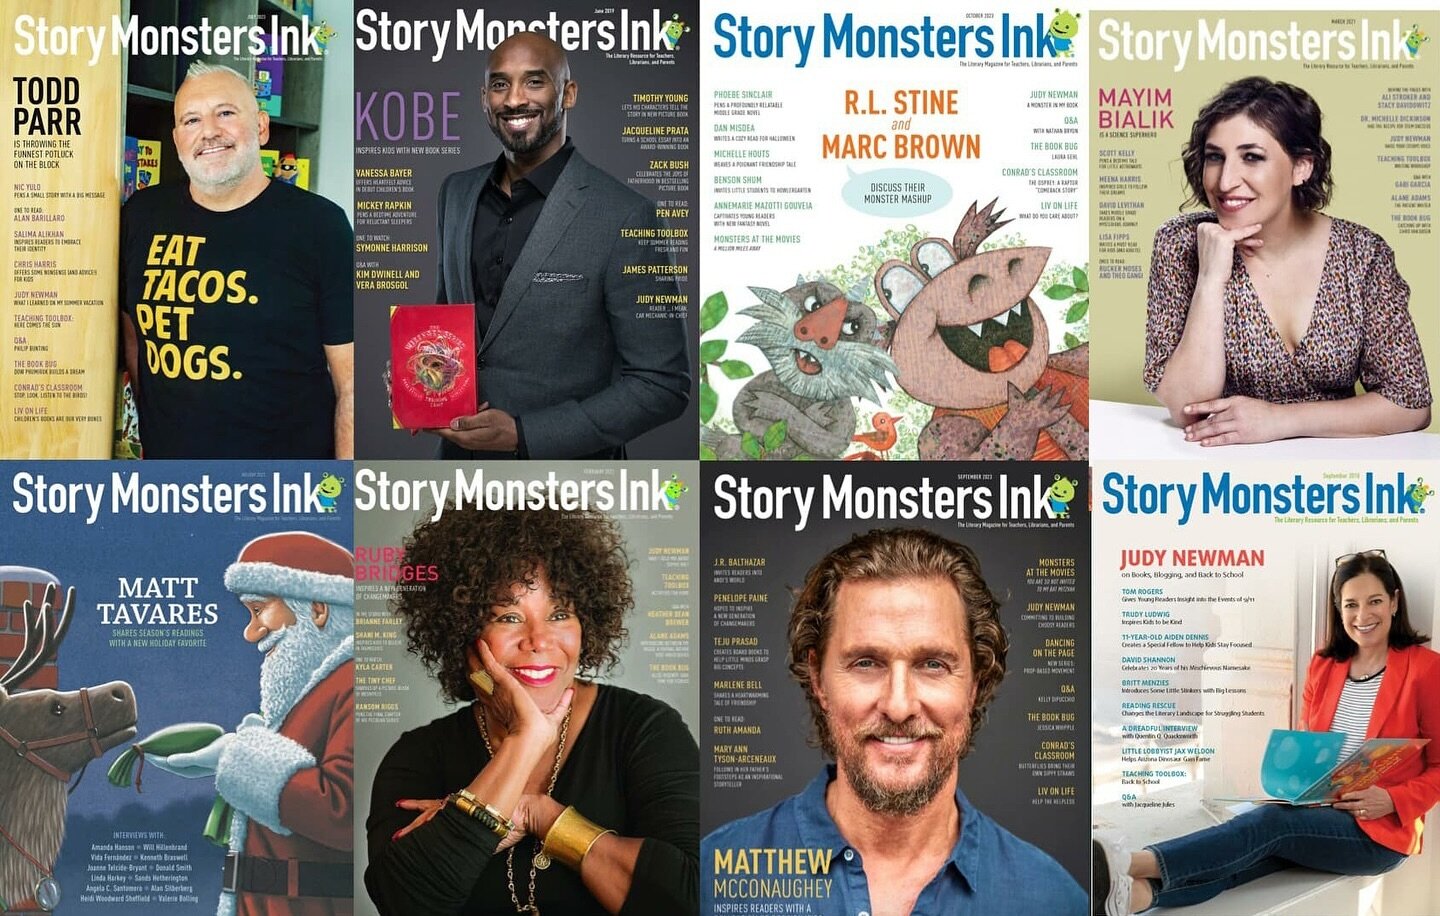 Last call to spring into April book promotions!
 
Add your books to our April issue of Story Monsters Ink! We still have ad spaces in full-page, half-page, and quarter-page sizes. We&rsquo;ll design it for you at no extra charge!

Reading listings ar